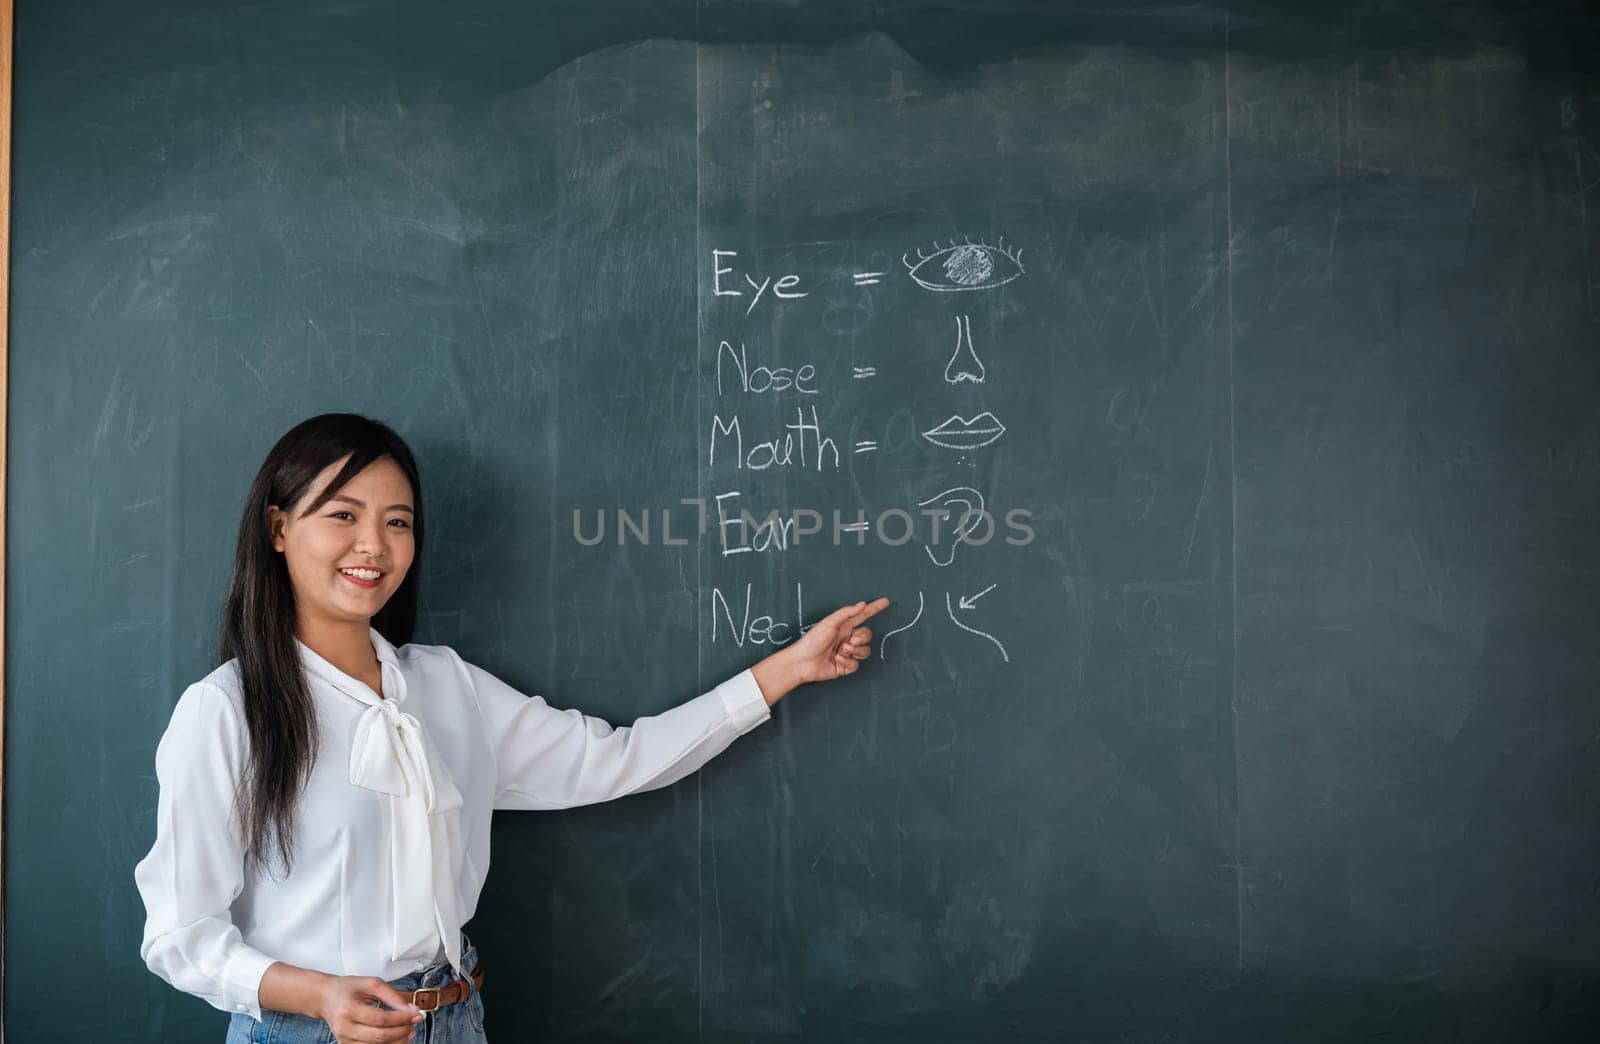 A woman is pointing to a blackboard with the words eye and mouth written on it